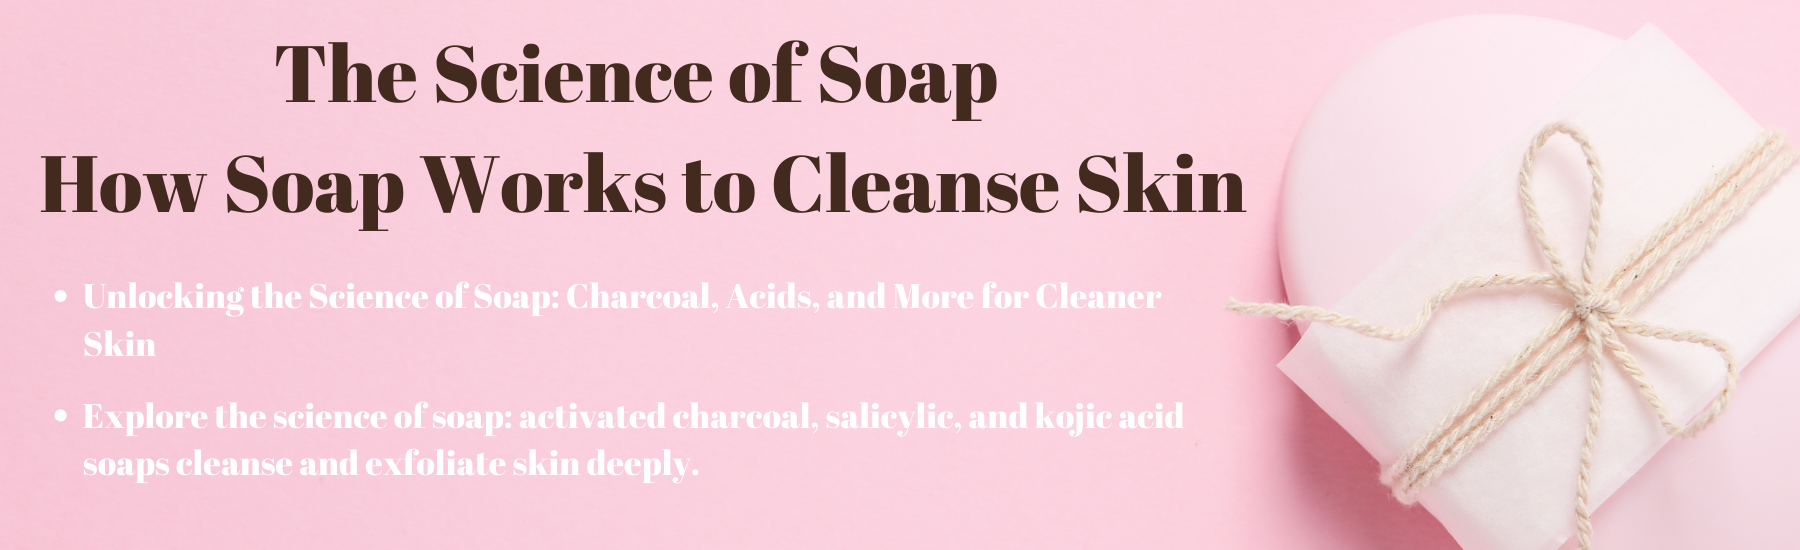 How Soap Works to Cleanse Skin